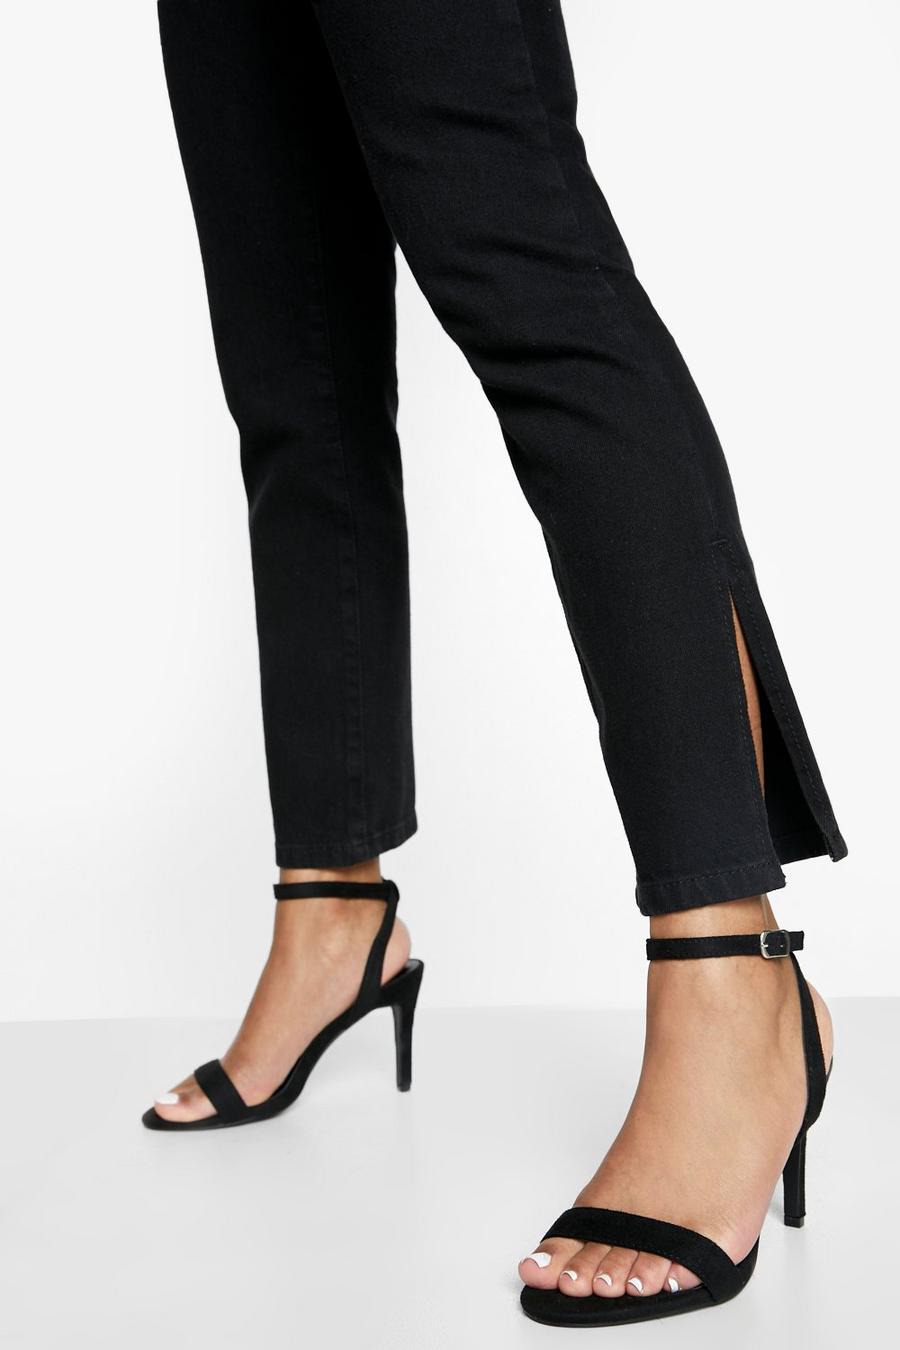 Black Wide Fit Barely There Heels